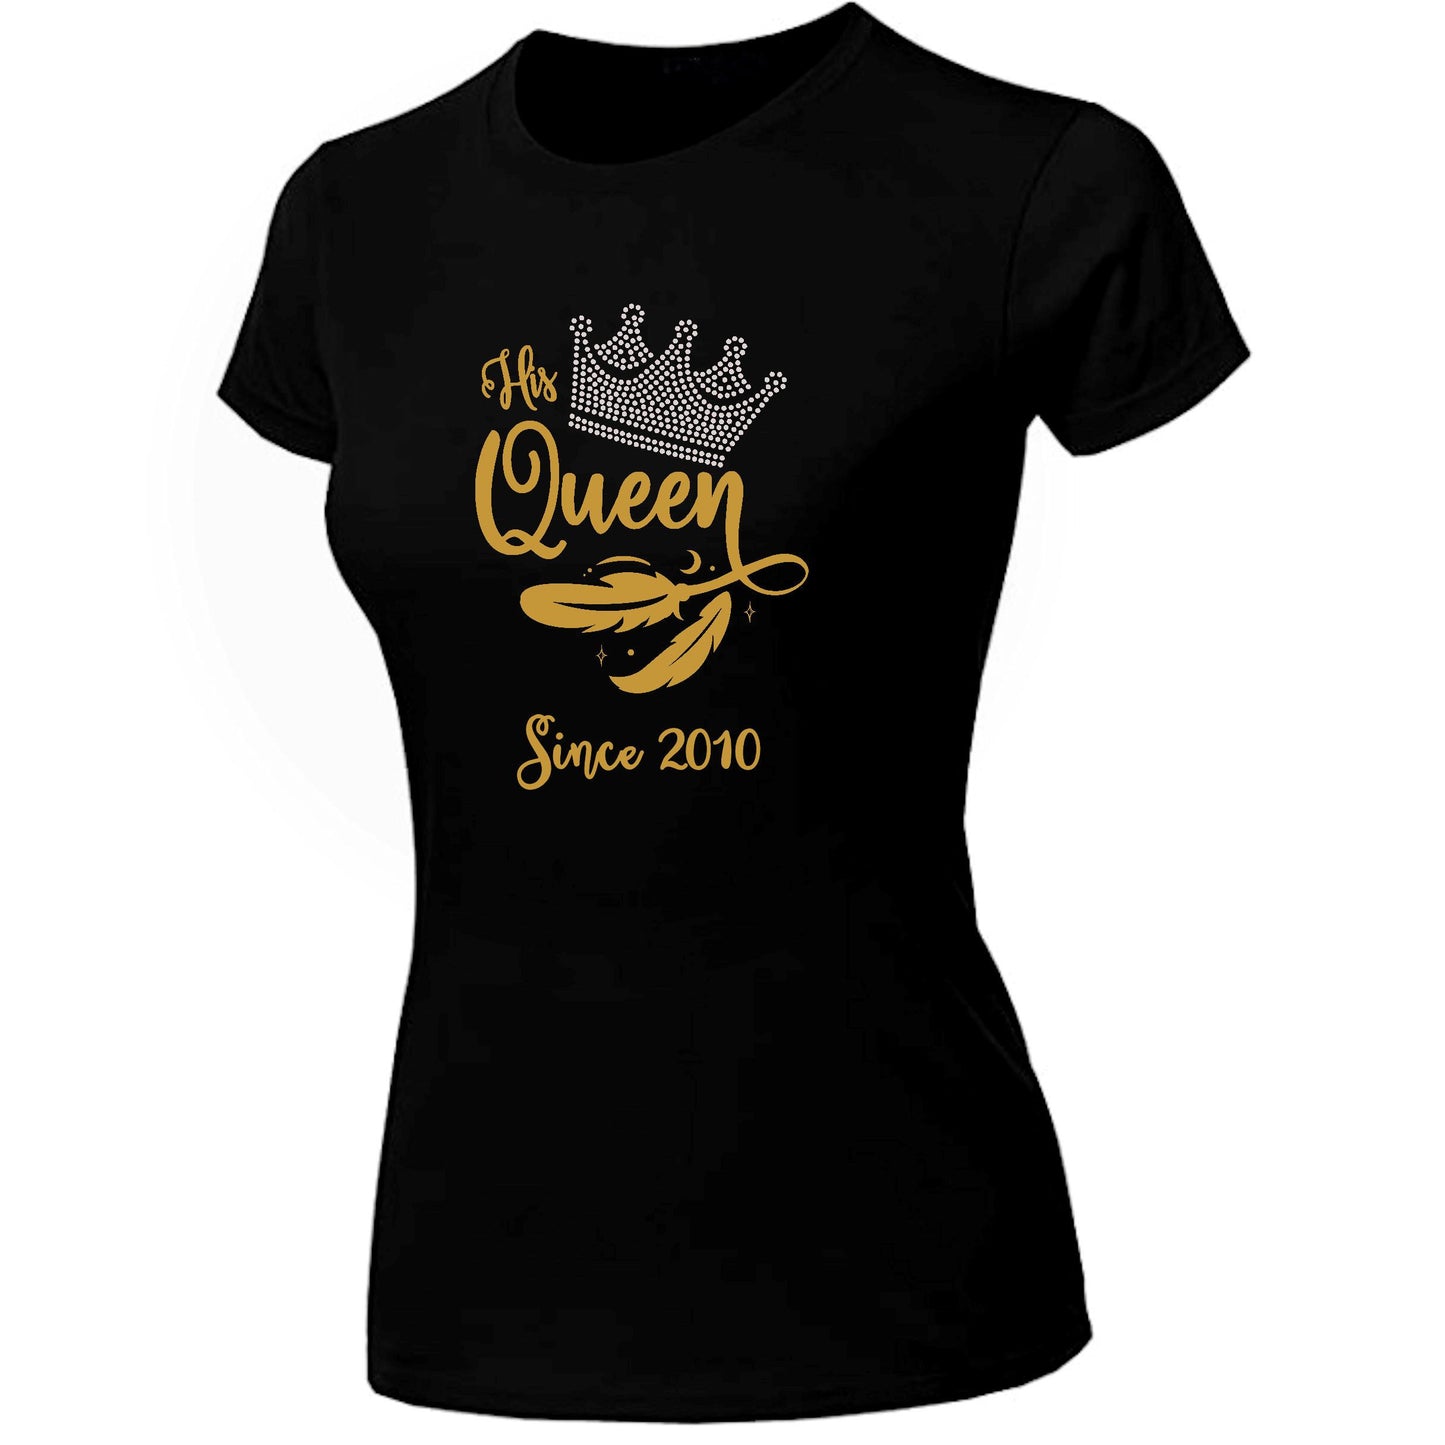 His Queen Her King Couples T-Shirt Set